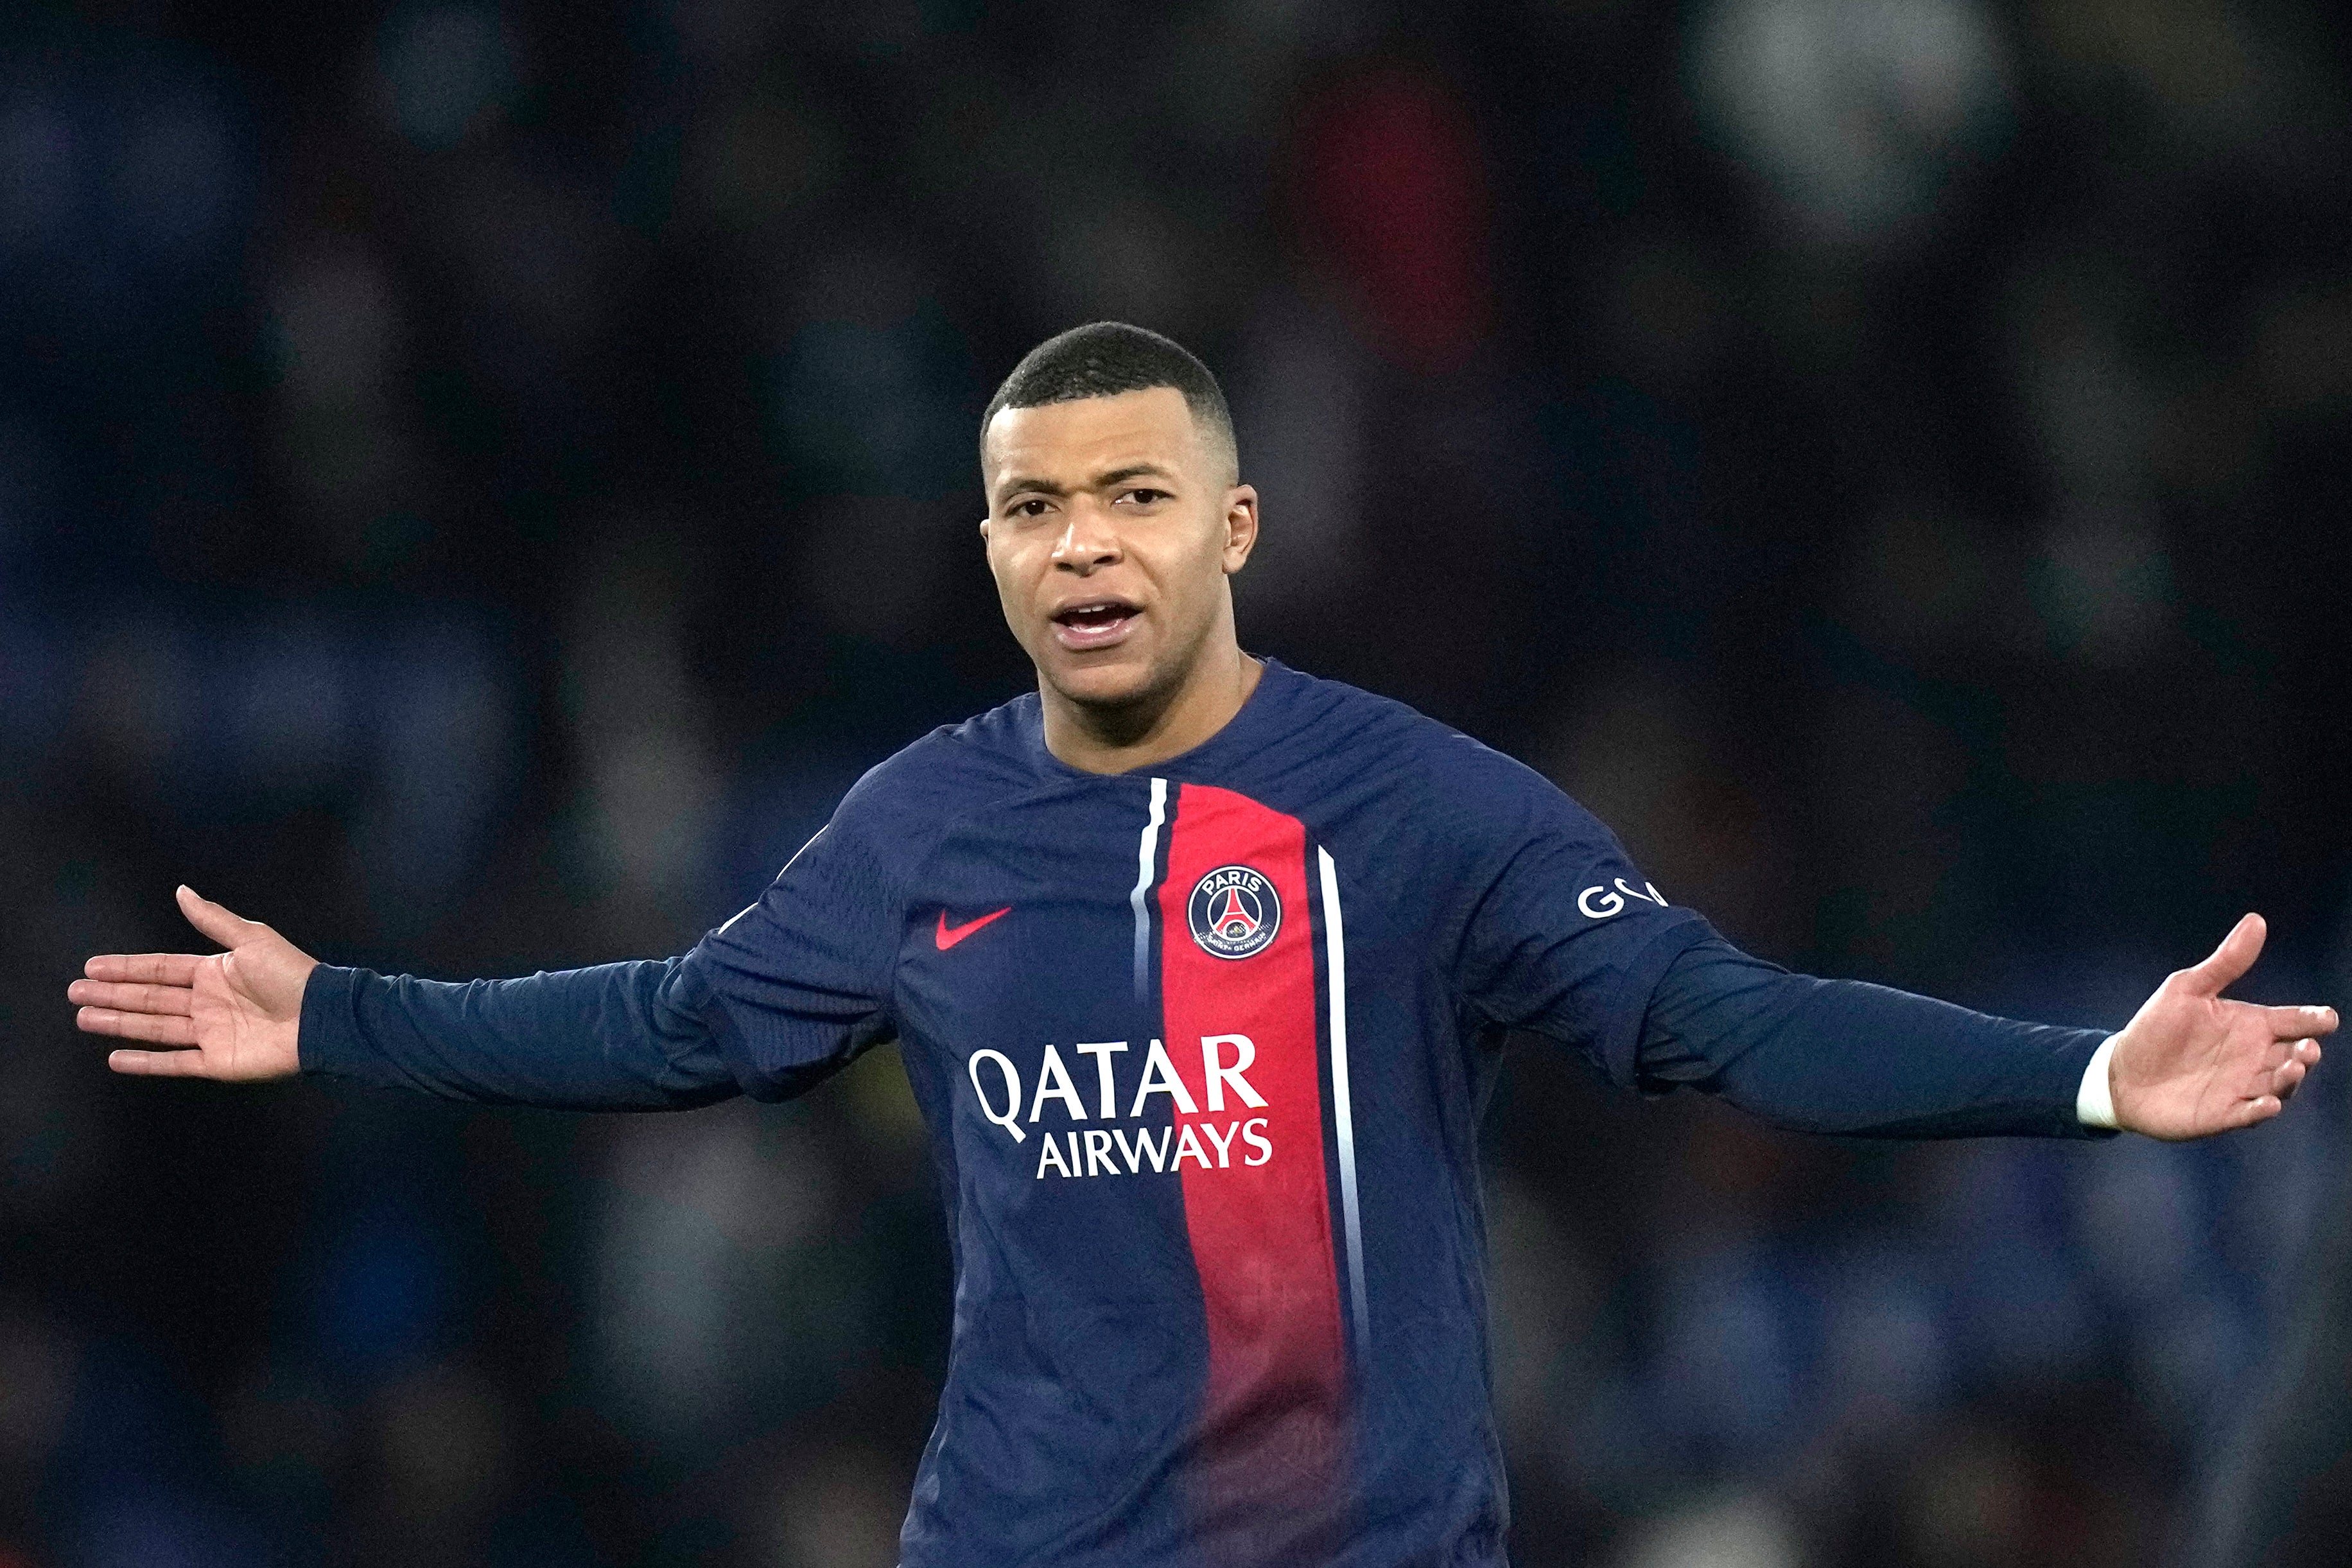 PSG and Mbappe will face Real Sociedad in the Champions League round of 16